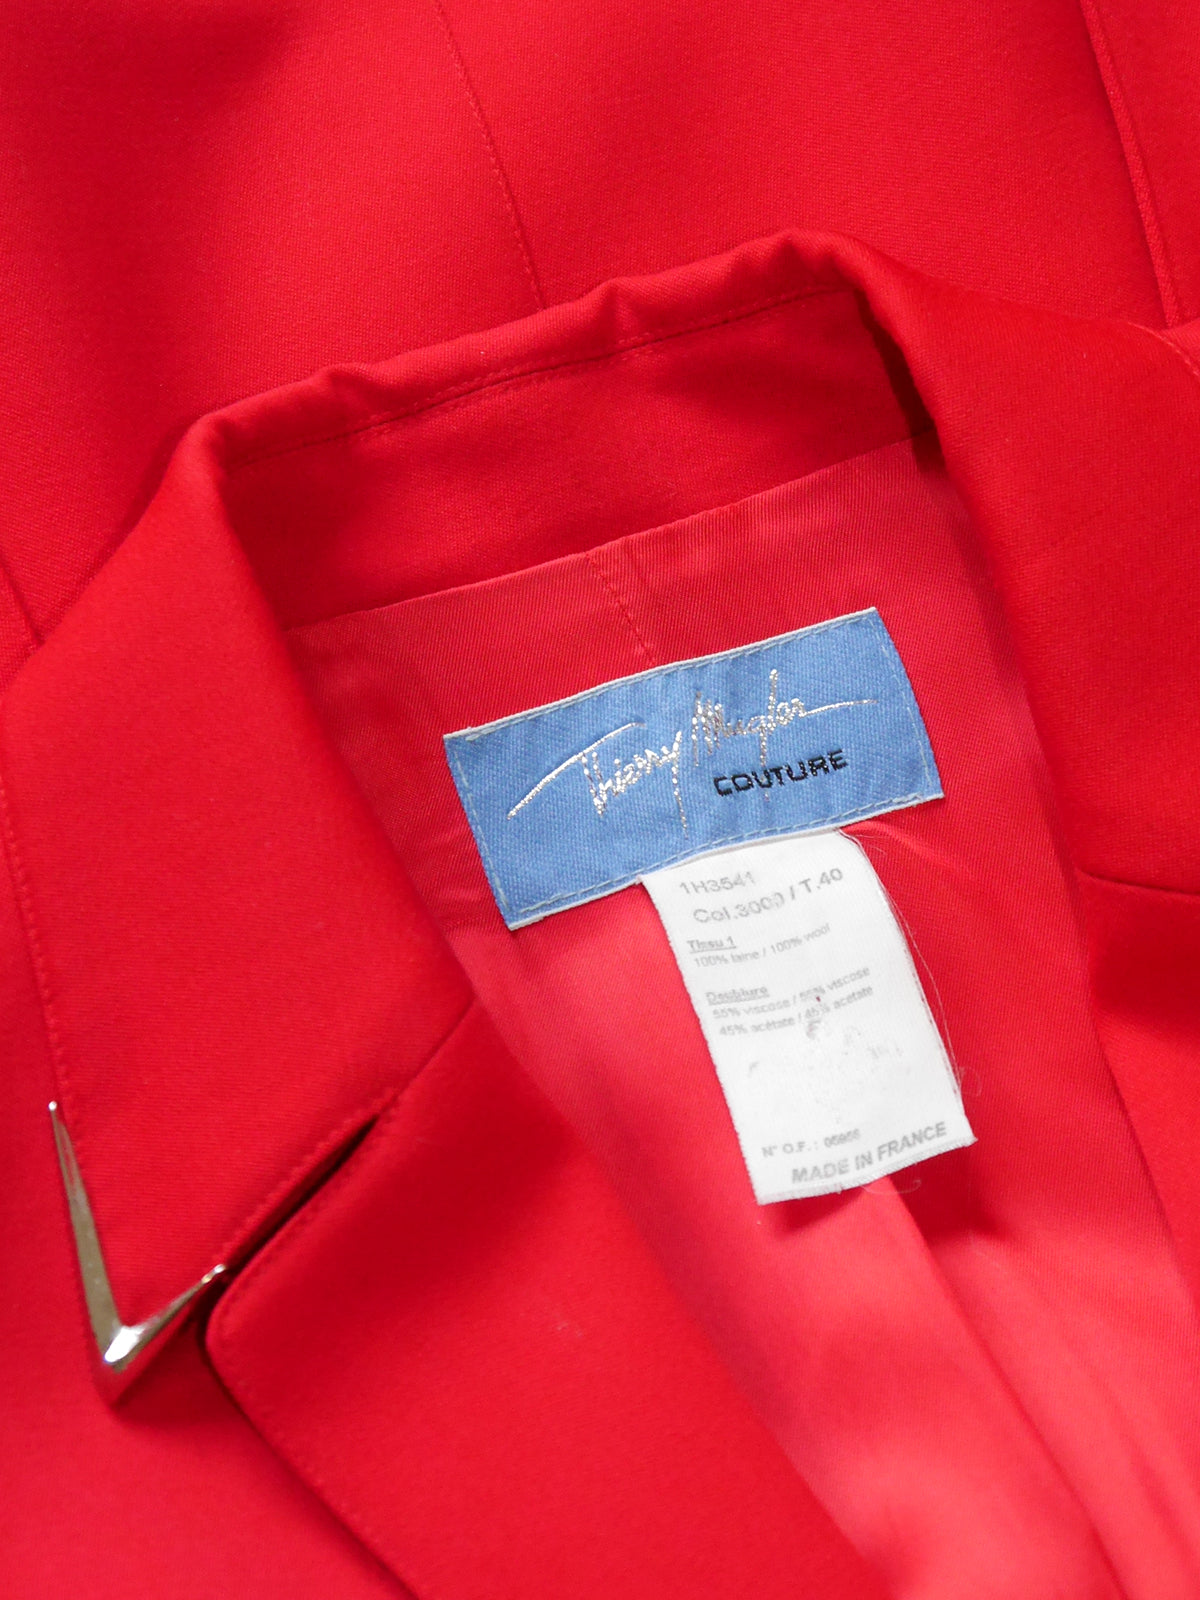 THIERRY MUGLER Couture Vintage Red Jacket w/ Metal Details